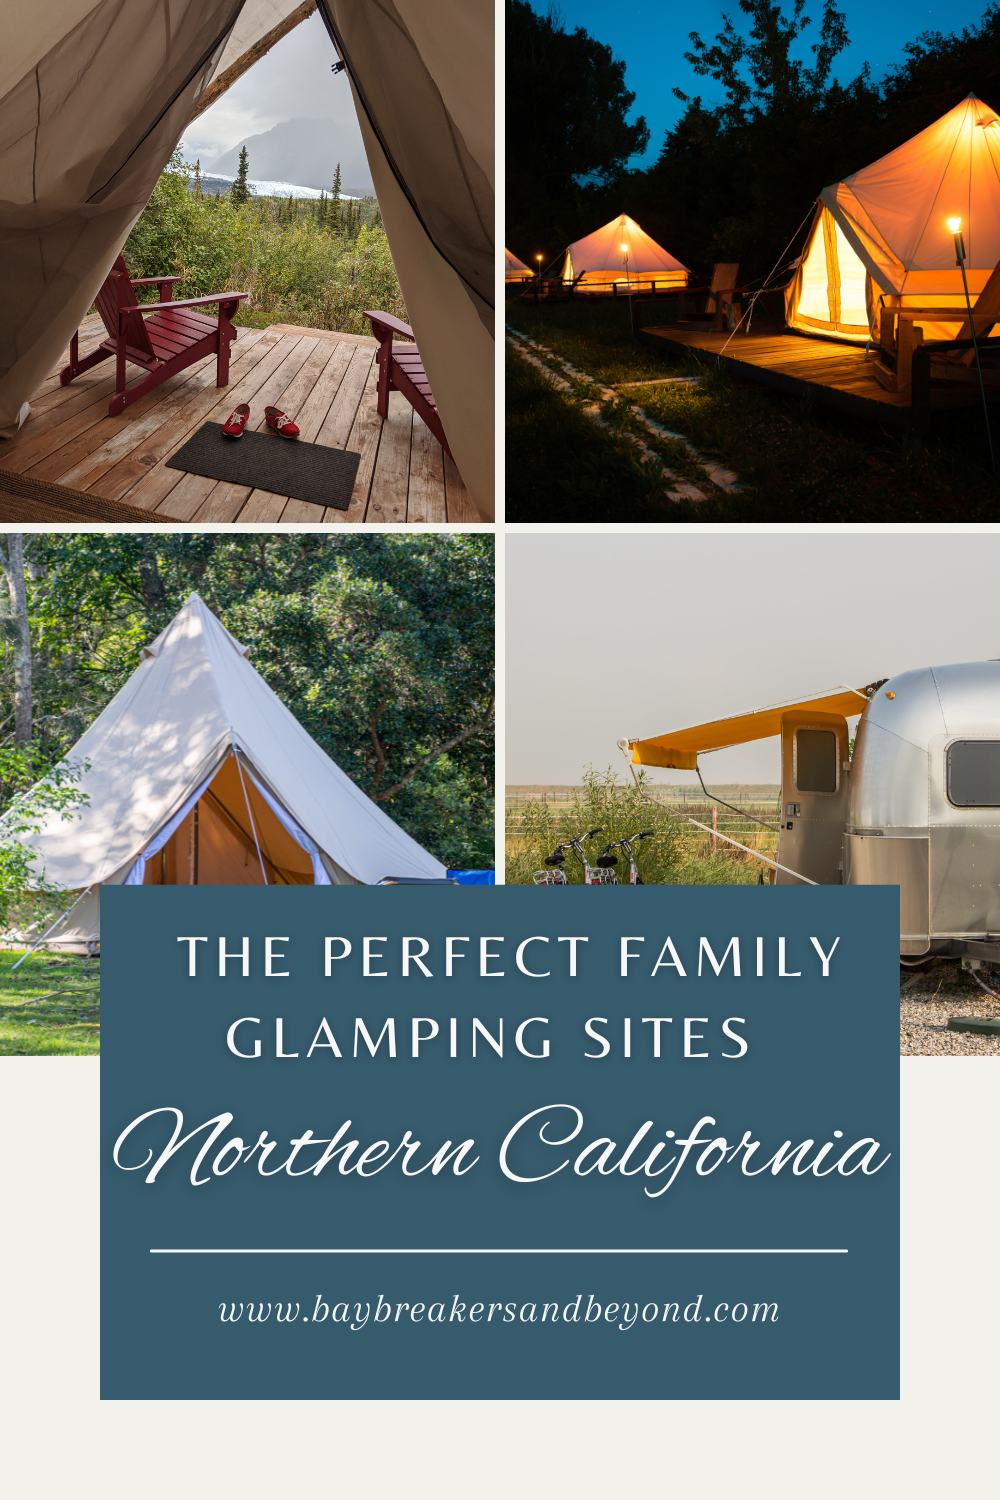 The perfect family glamping sites northern california